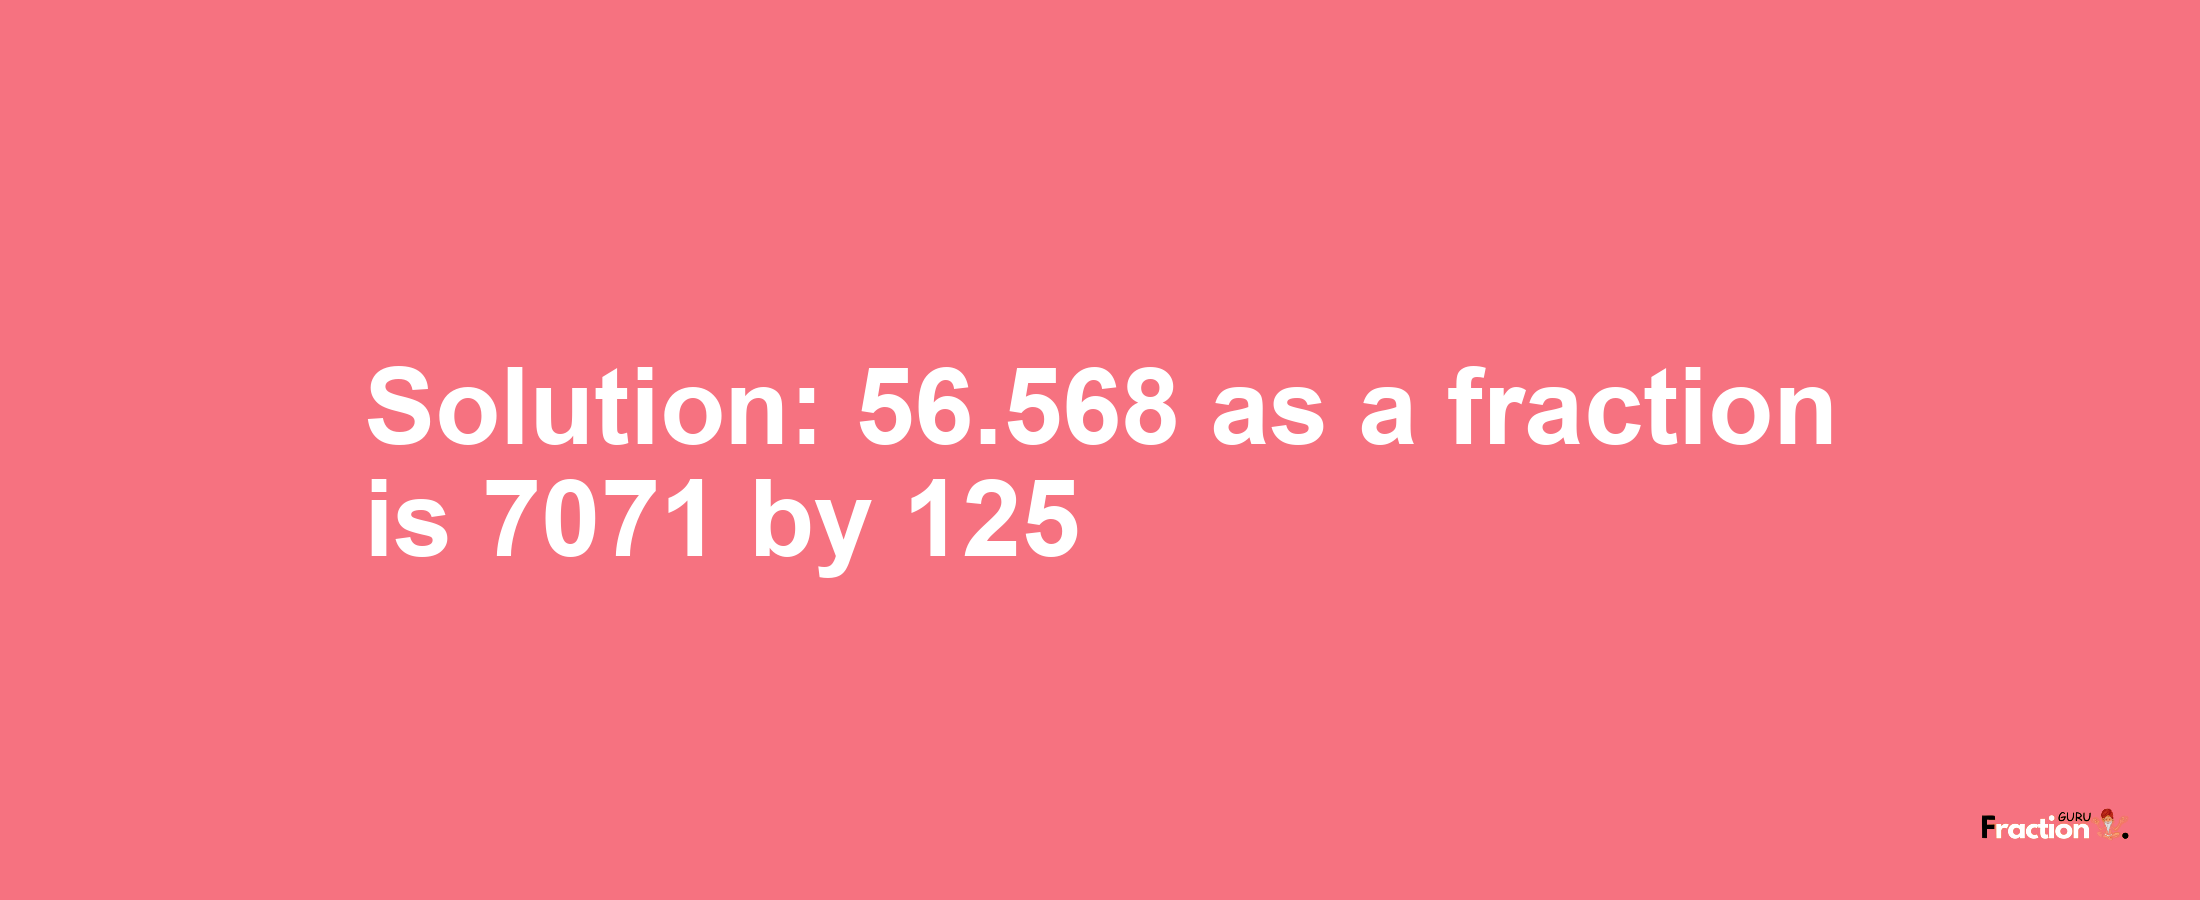 Solution:56.568 as a fraction is 7071/125